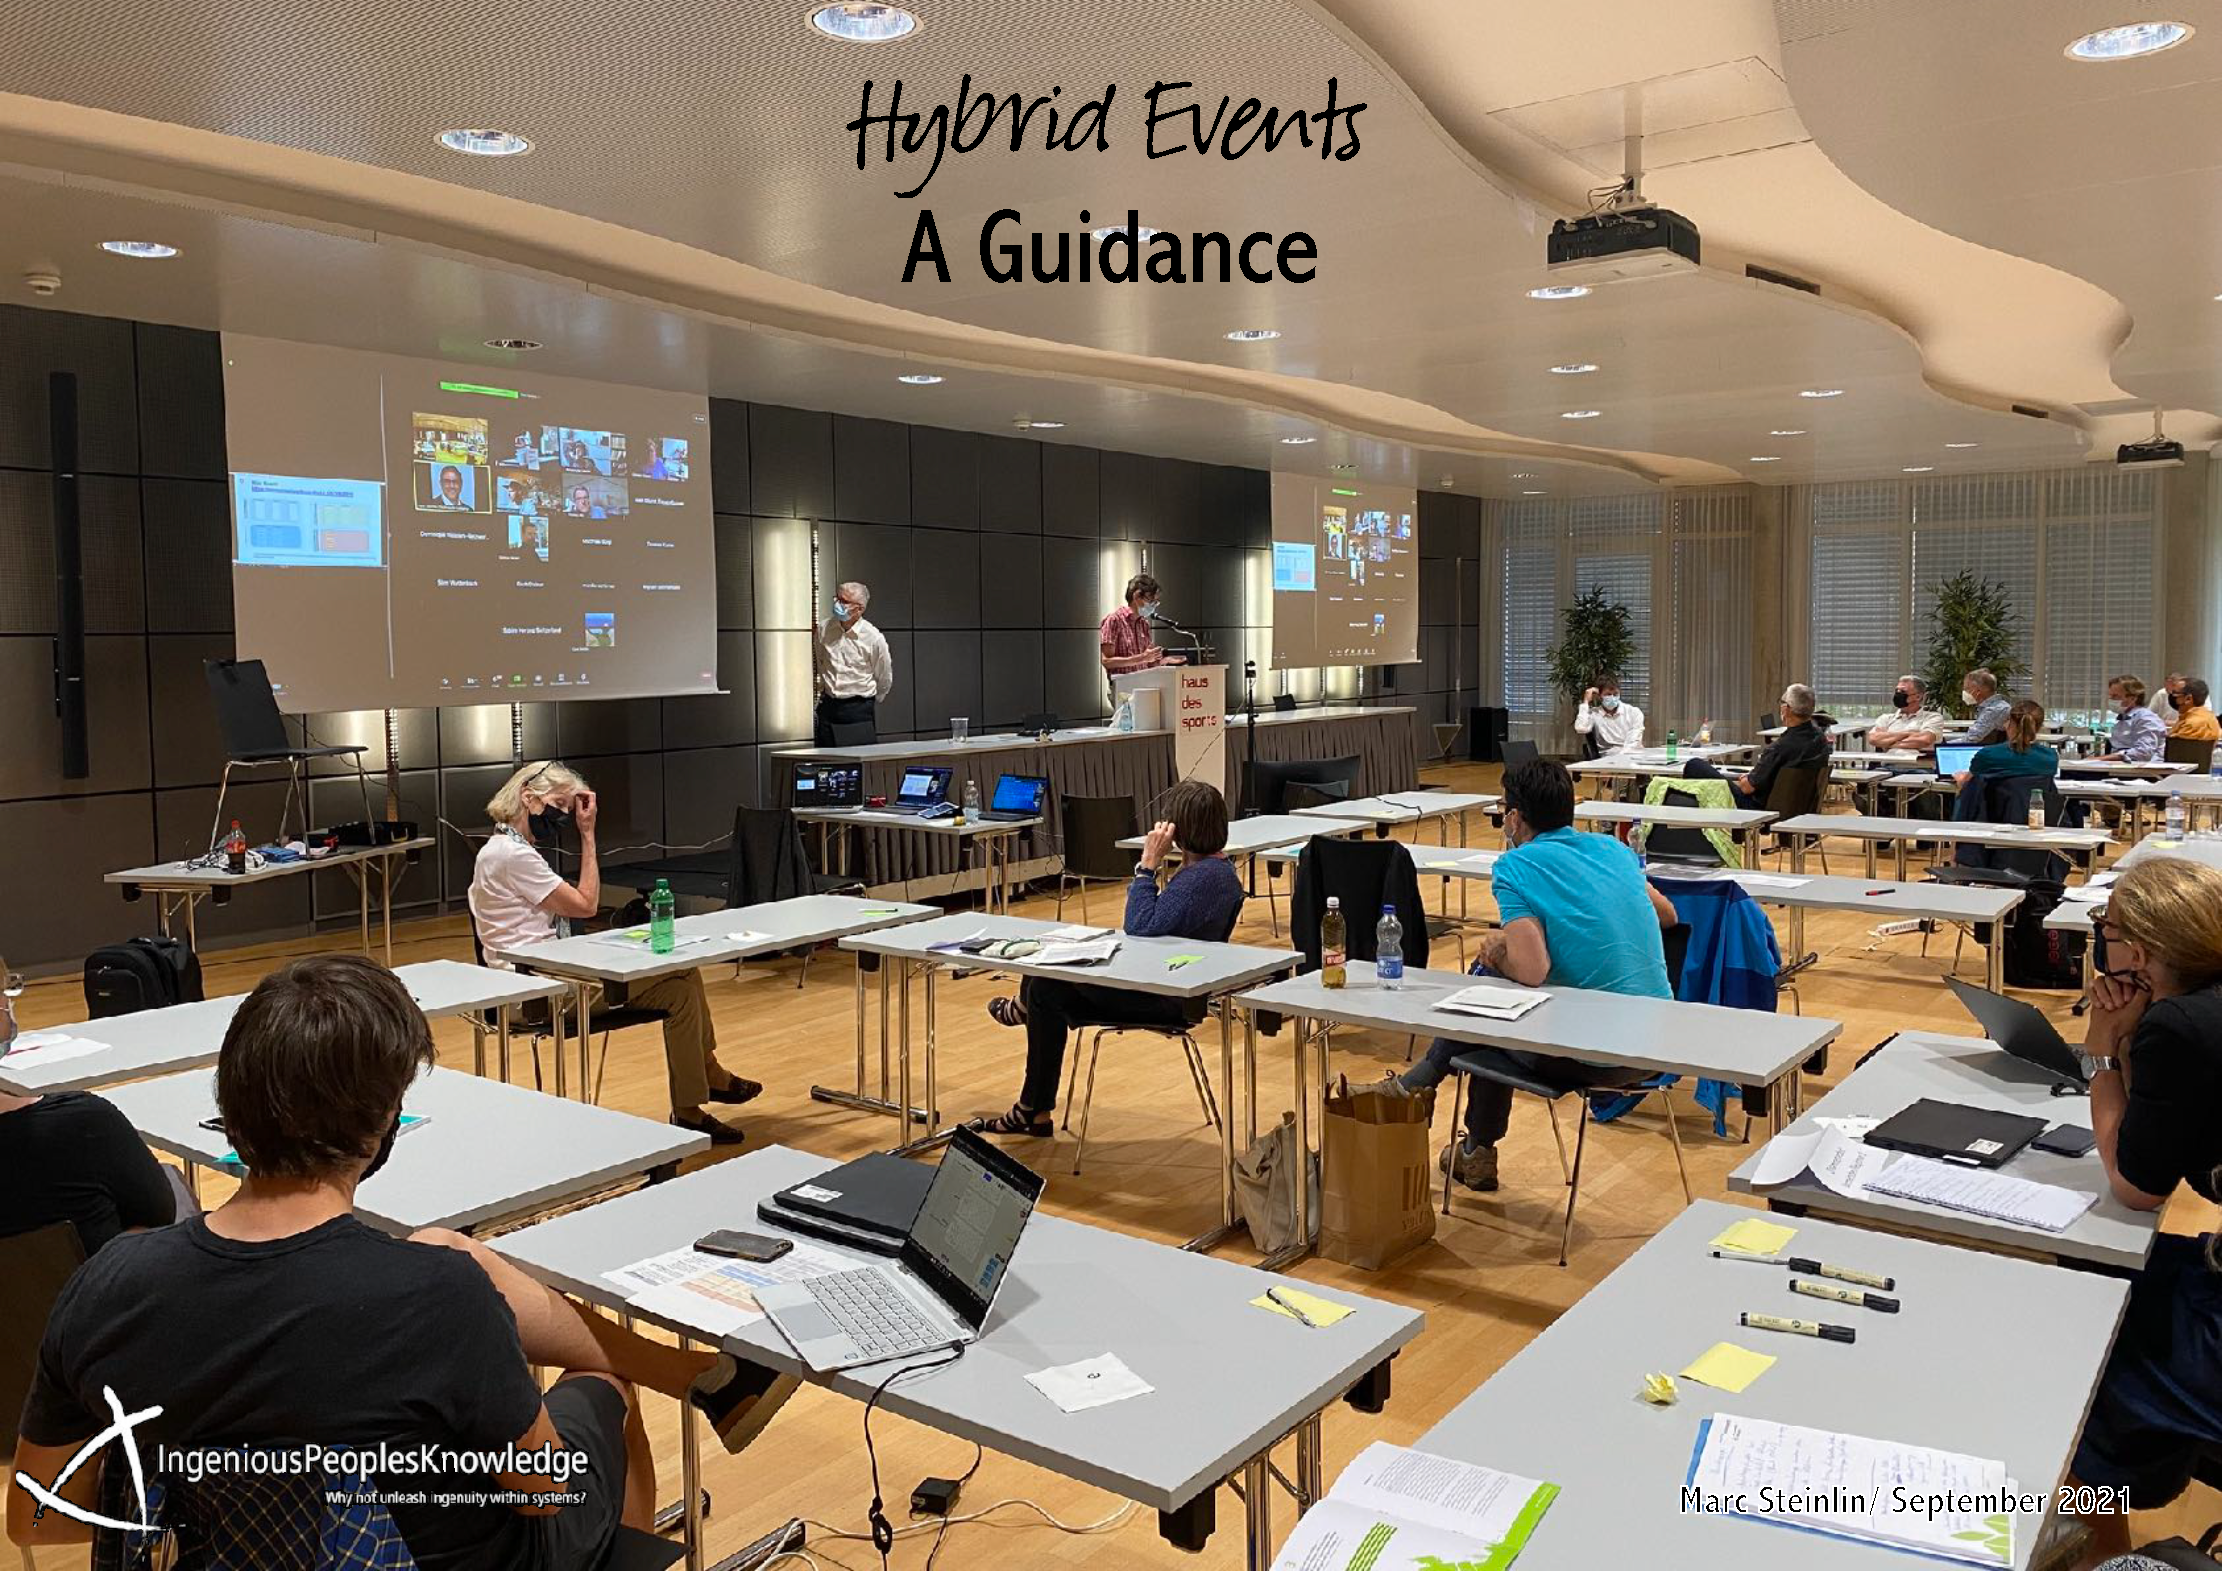 An image of the cover page of the "Hybrid Events: A Guidance" resource